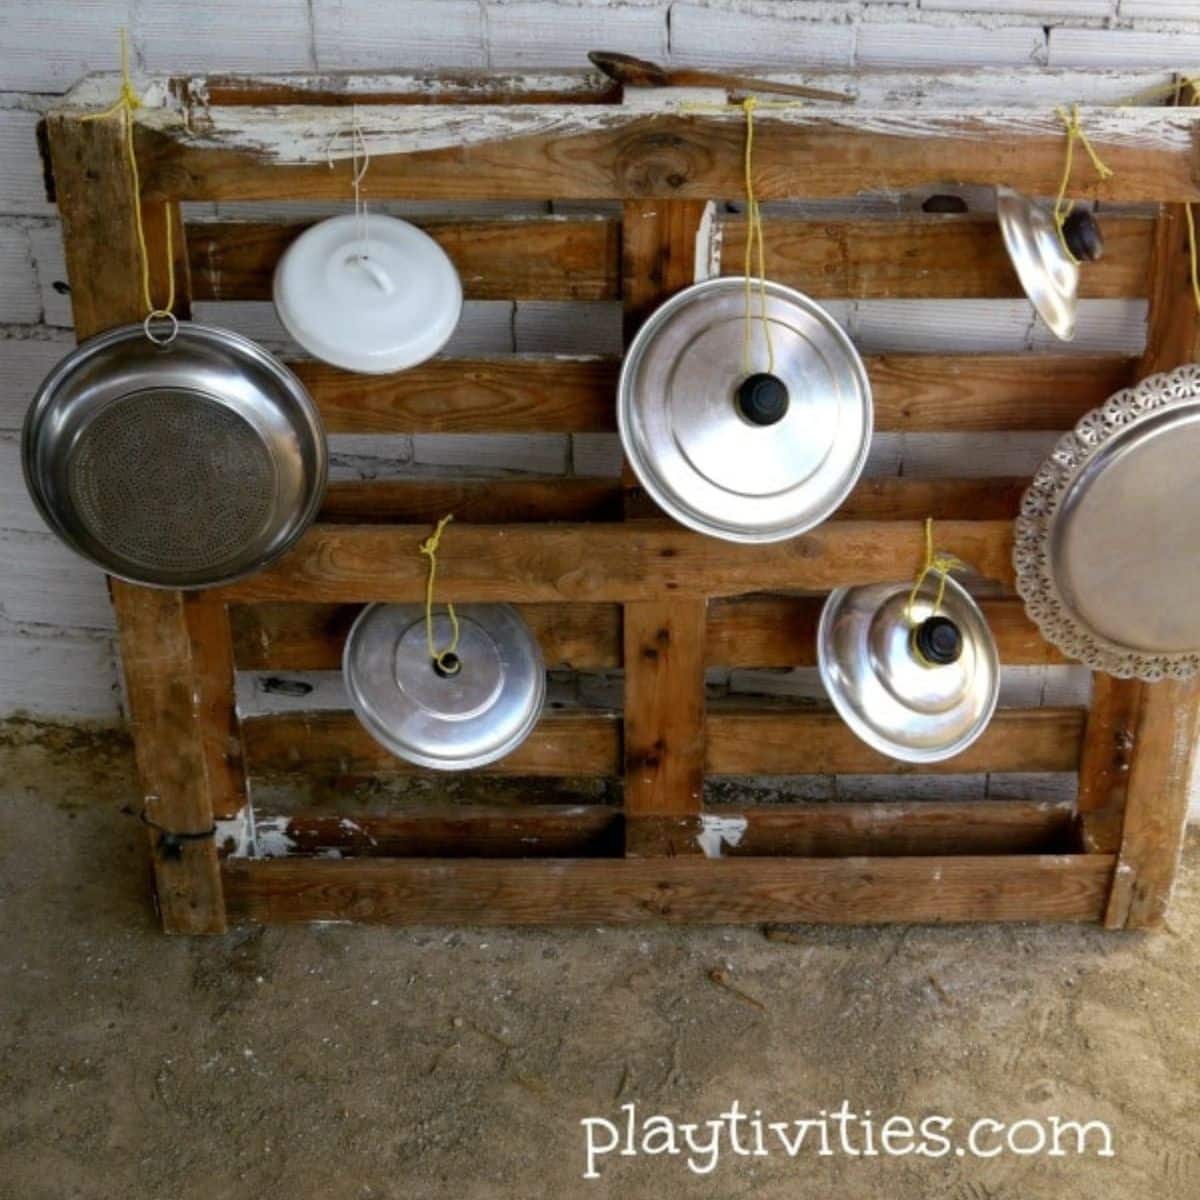 Homemade drums from pots and lids on a wooden palet.